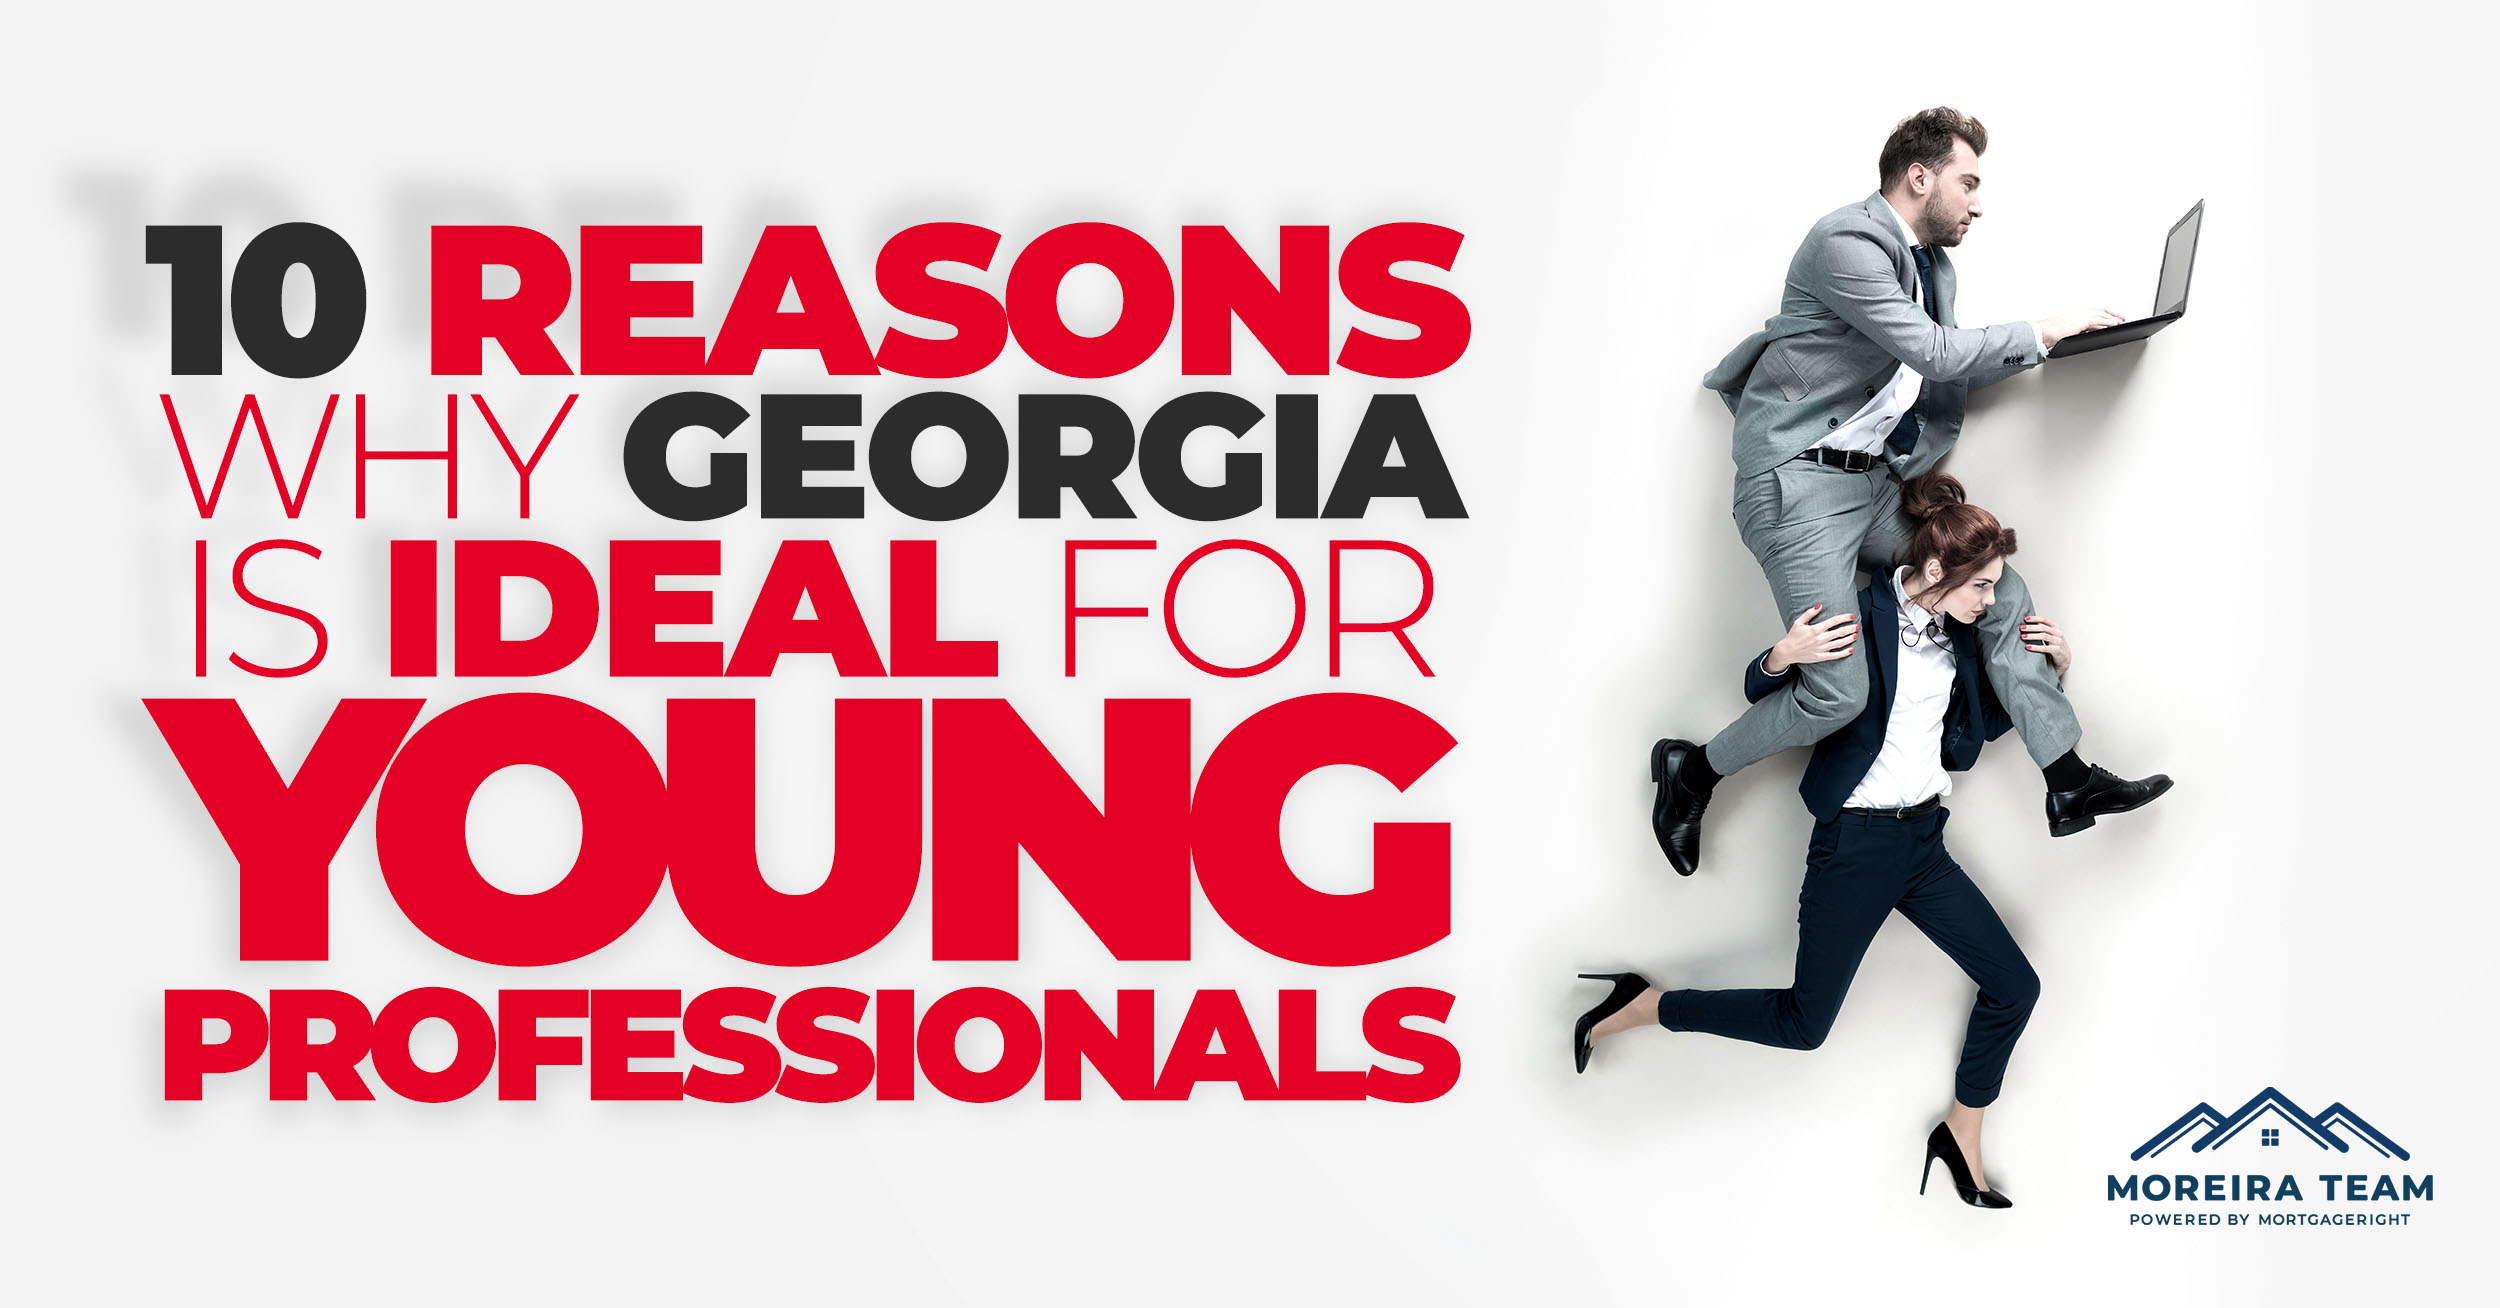 10 Reasons Why Georgia is Ideal for Young Professionals